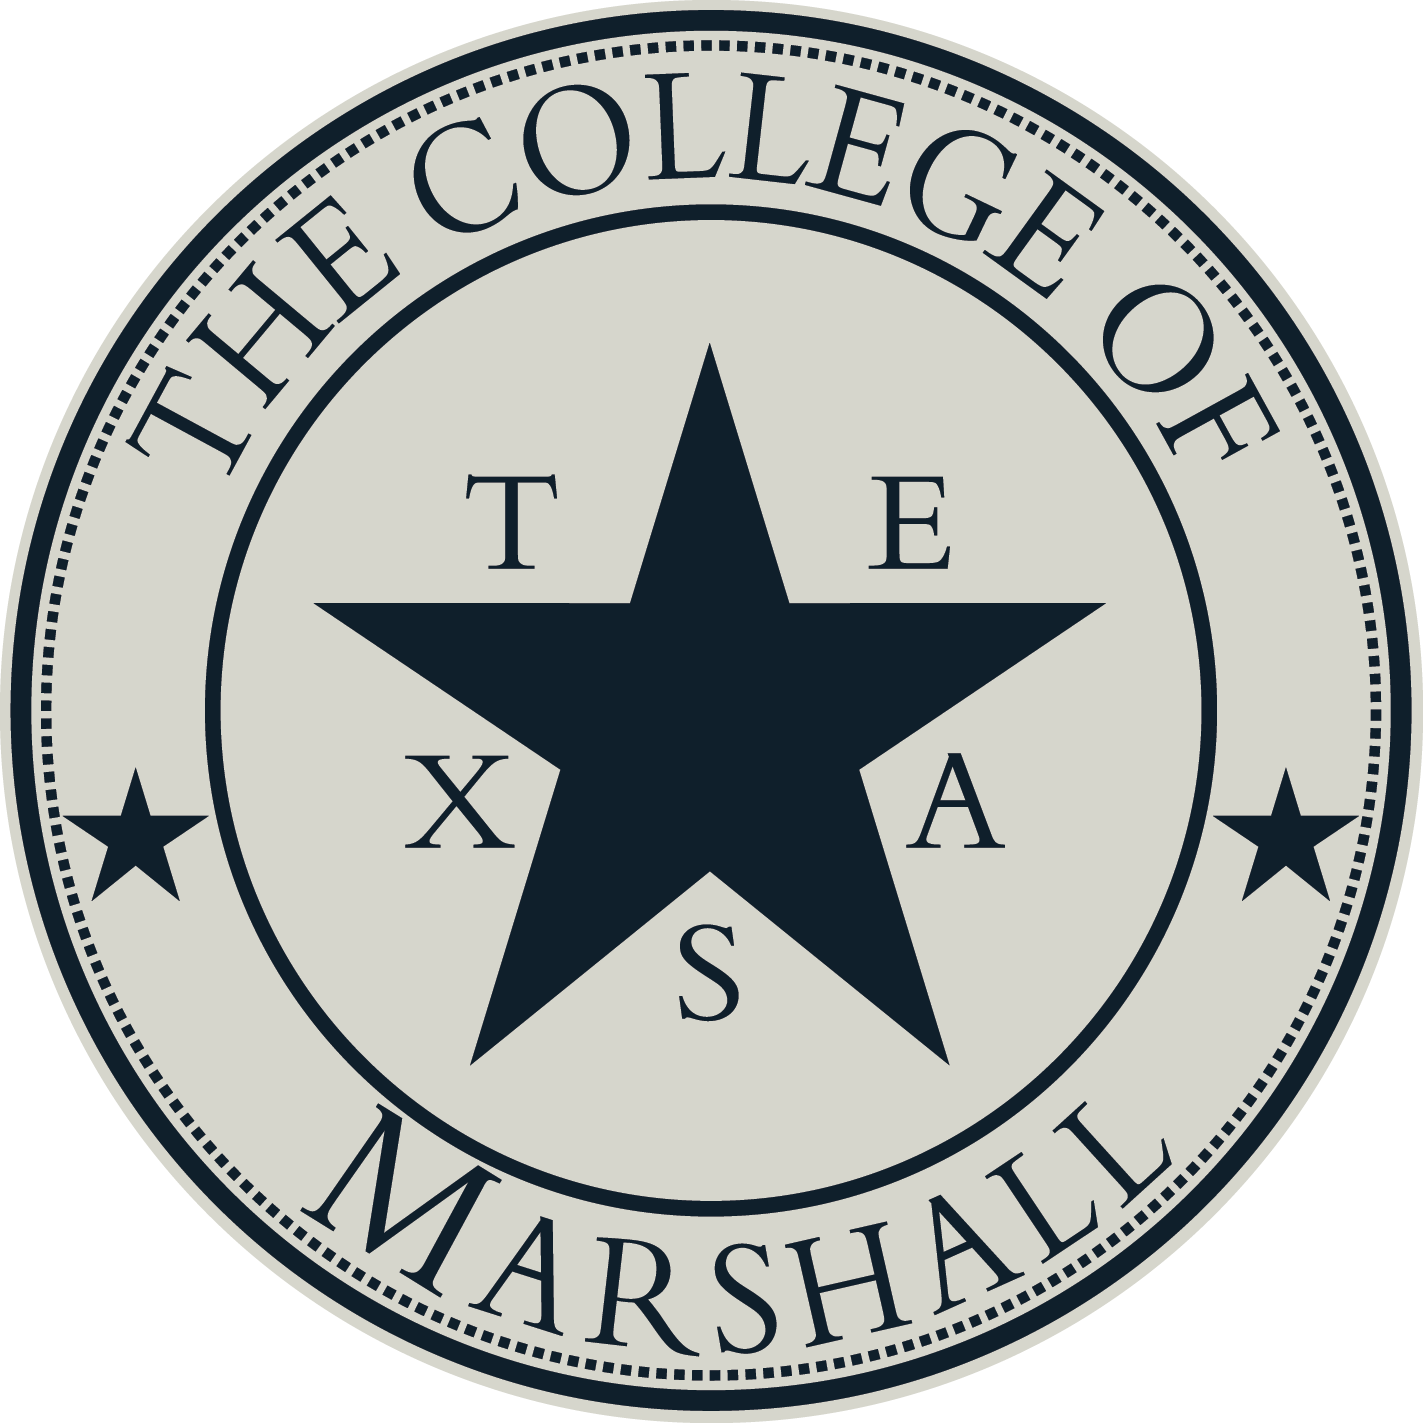 College of Marshall seal